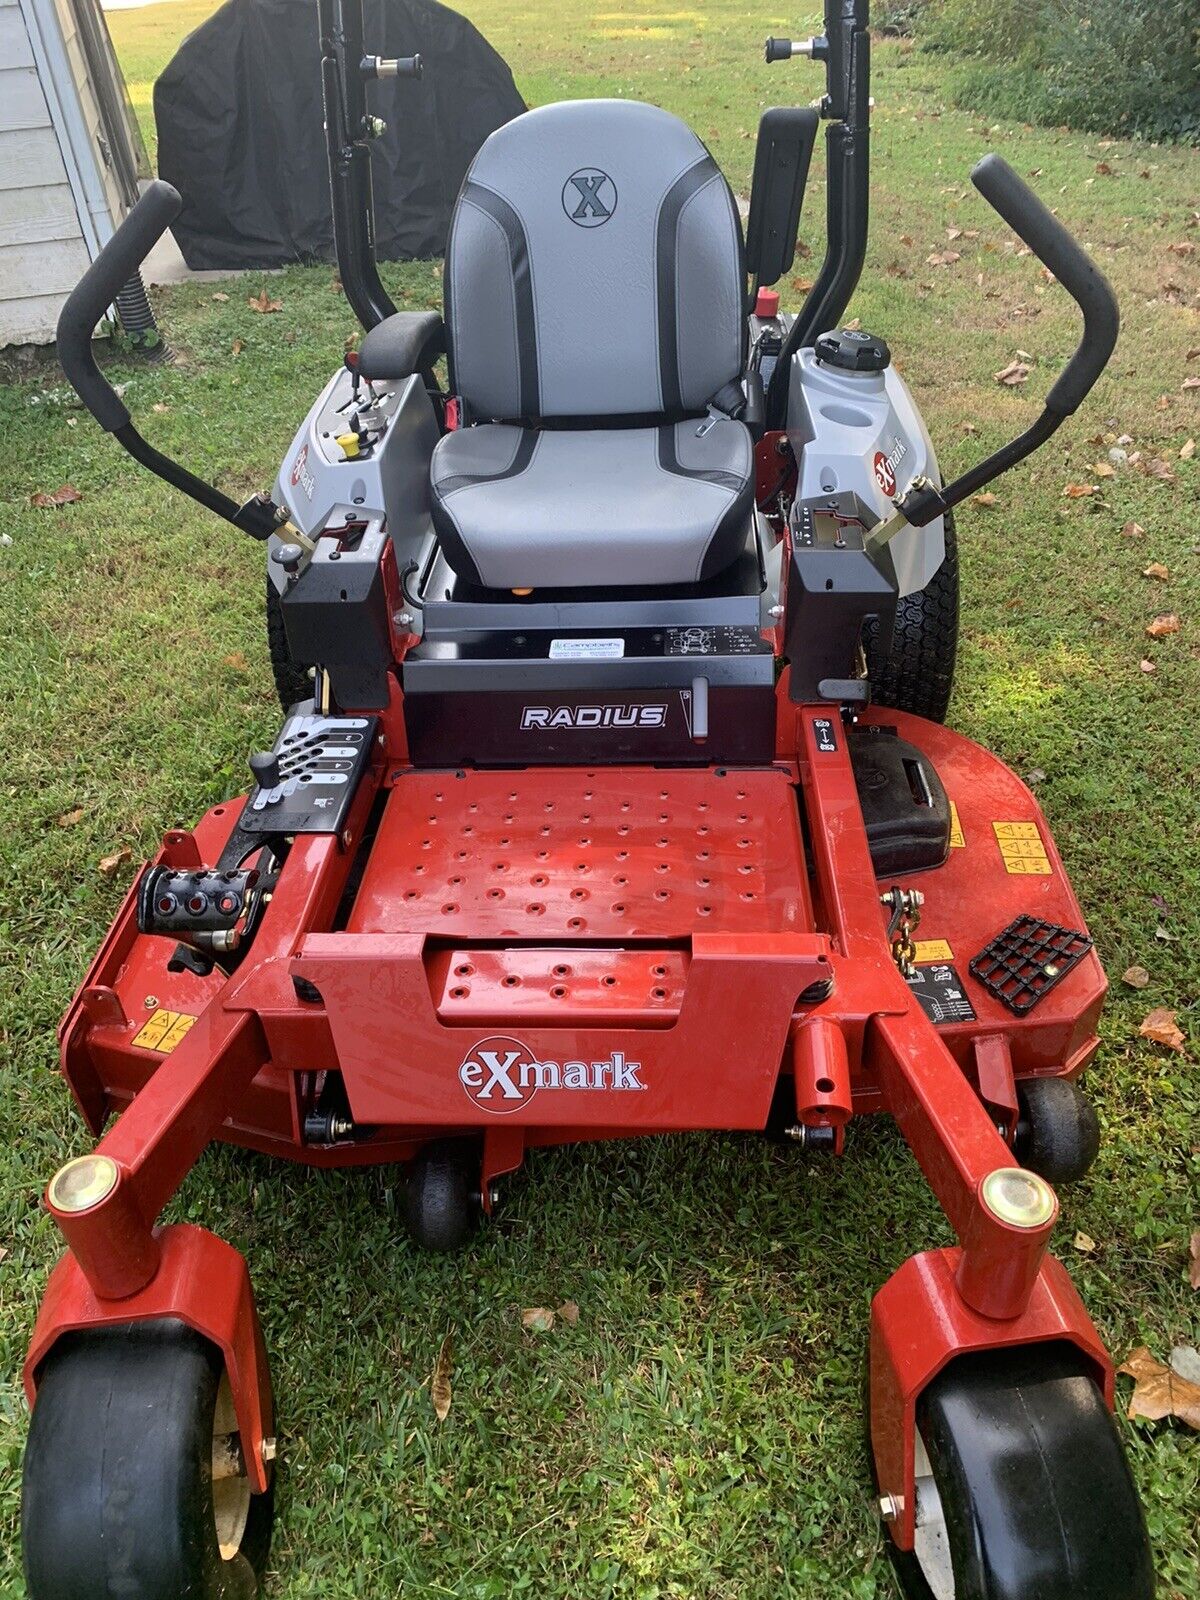 Exmark Radius E Series Lawnmower /only 16.7 Hours Of Use